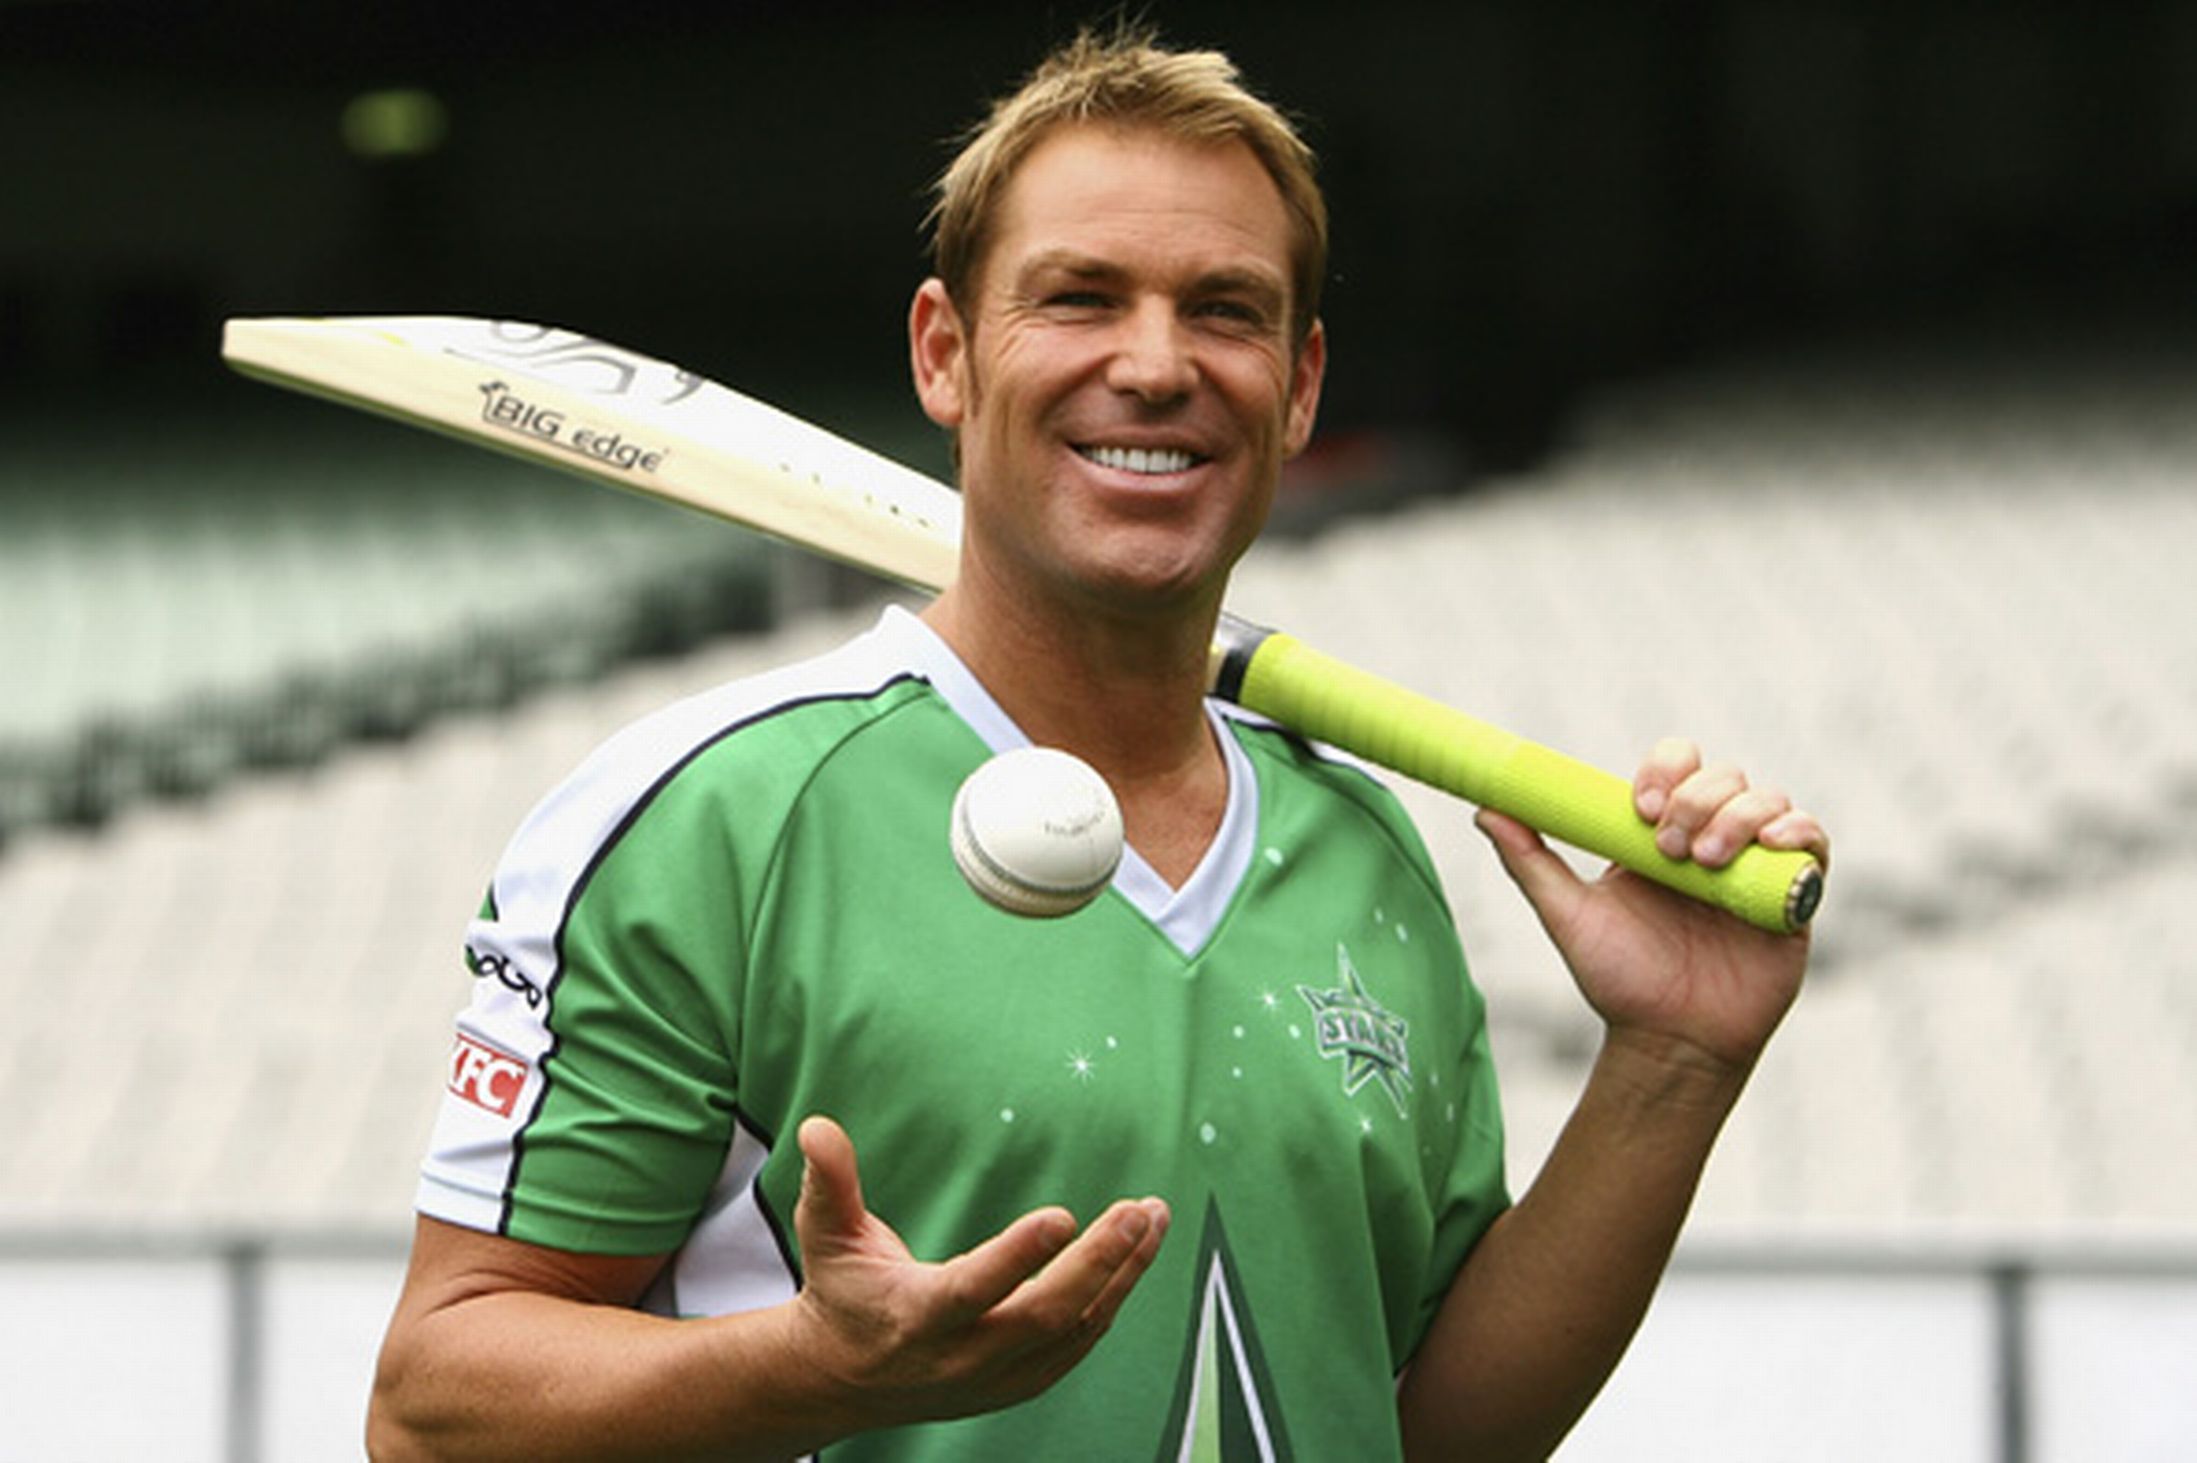 Are you looking for Shane Warne HD Wallpaper? Download latest